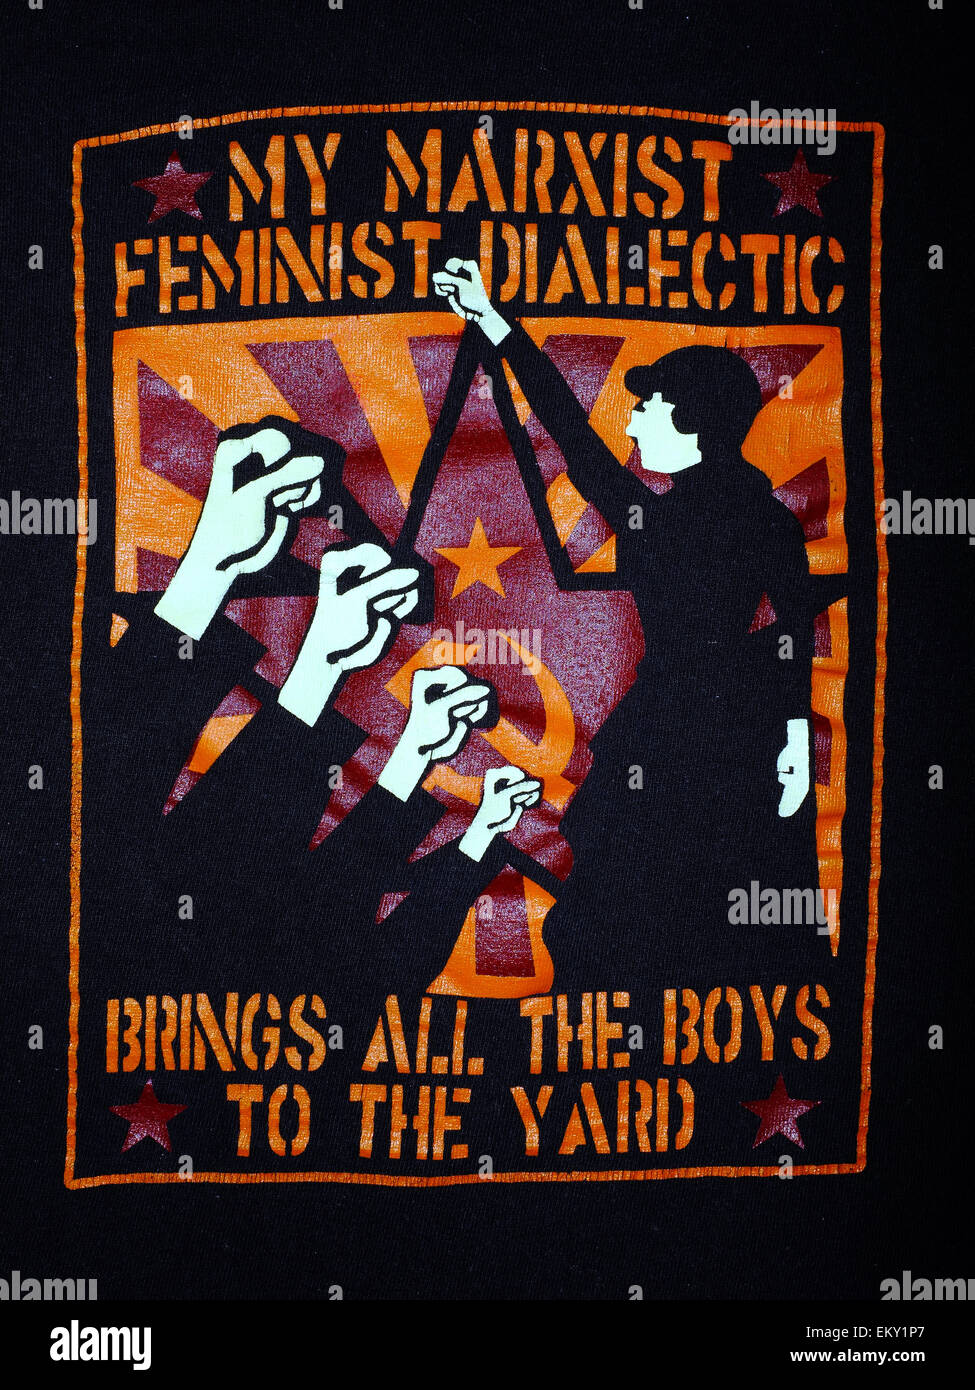 A Marxist Feminist graphic art design on the front of a top. Stock Photo